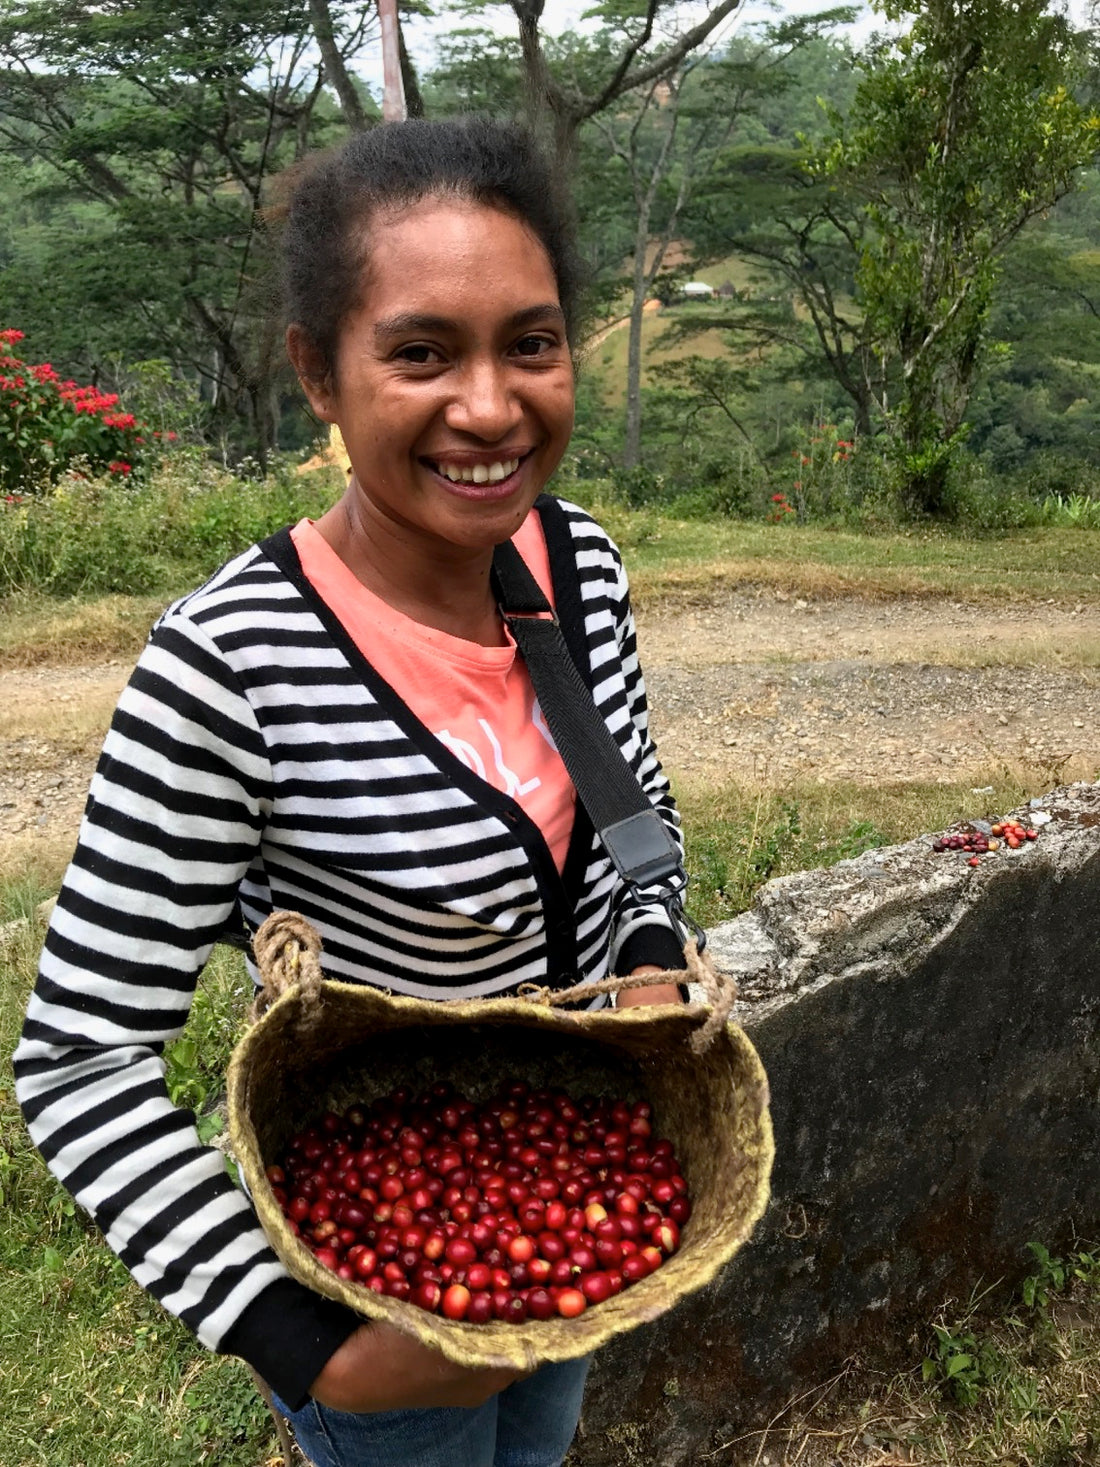 JUDGING NOTES: Timor-Leste 2019 Coffee Quality Competition Winner - Fatubessi, Natural Process